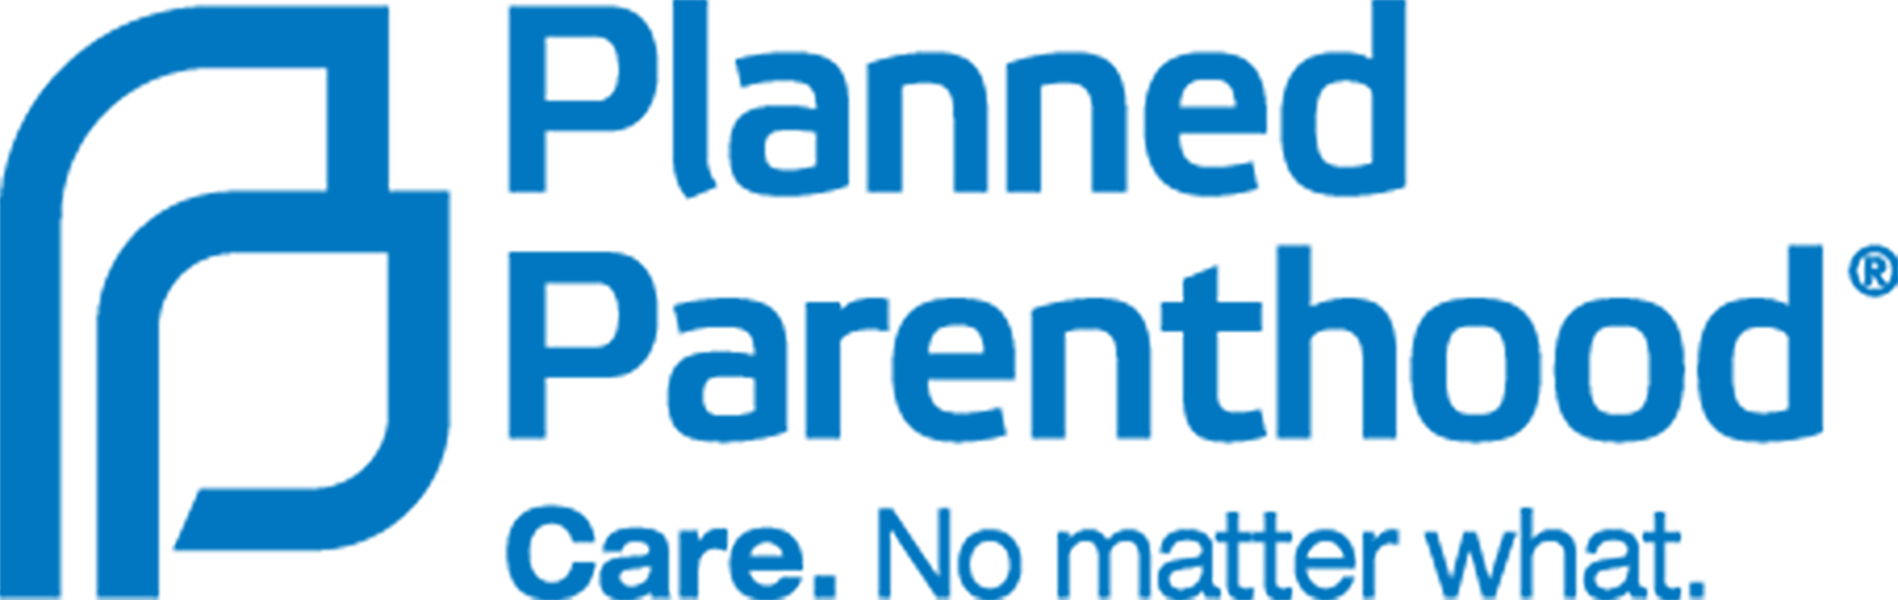 PPFA-Logo Primary Blue - HIGH RES.png